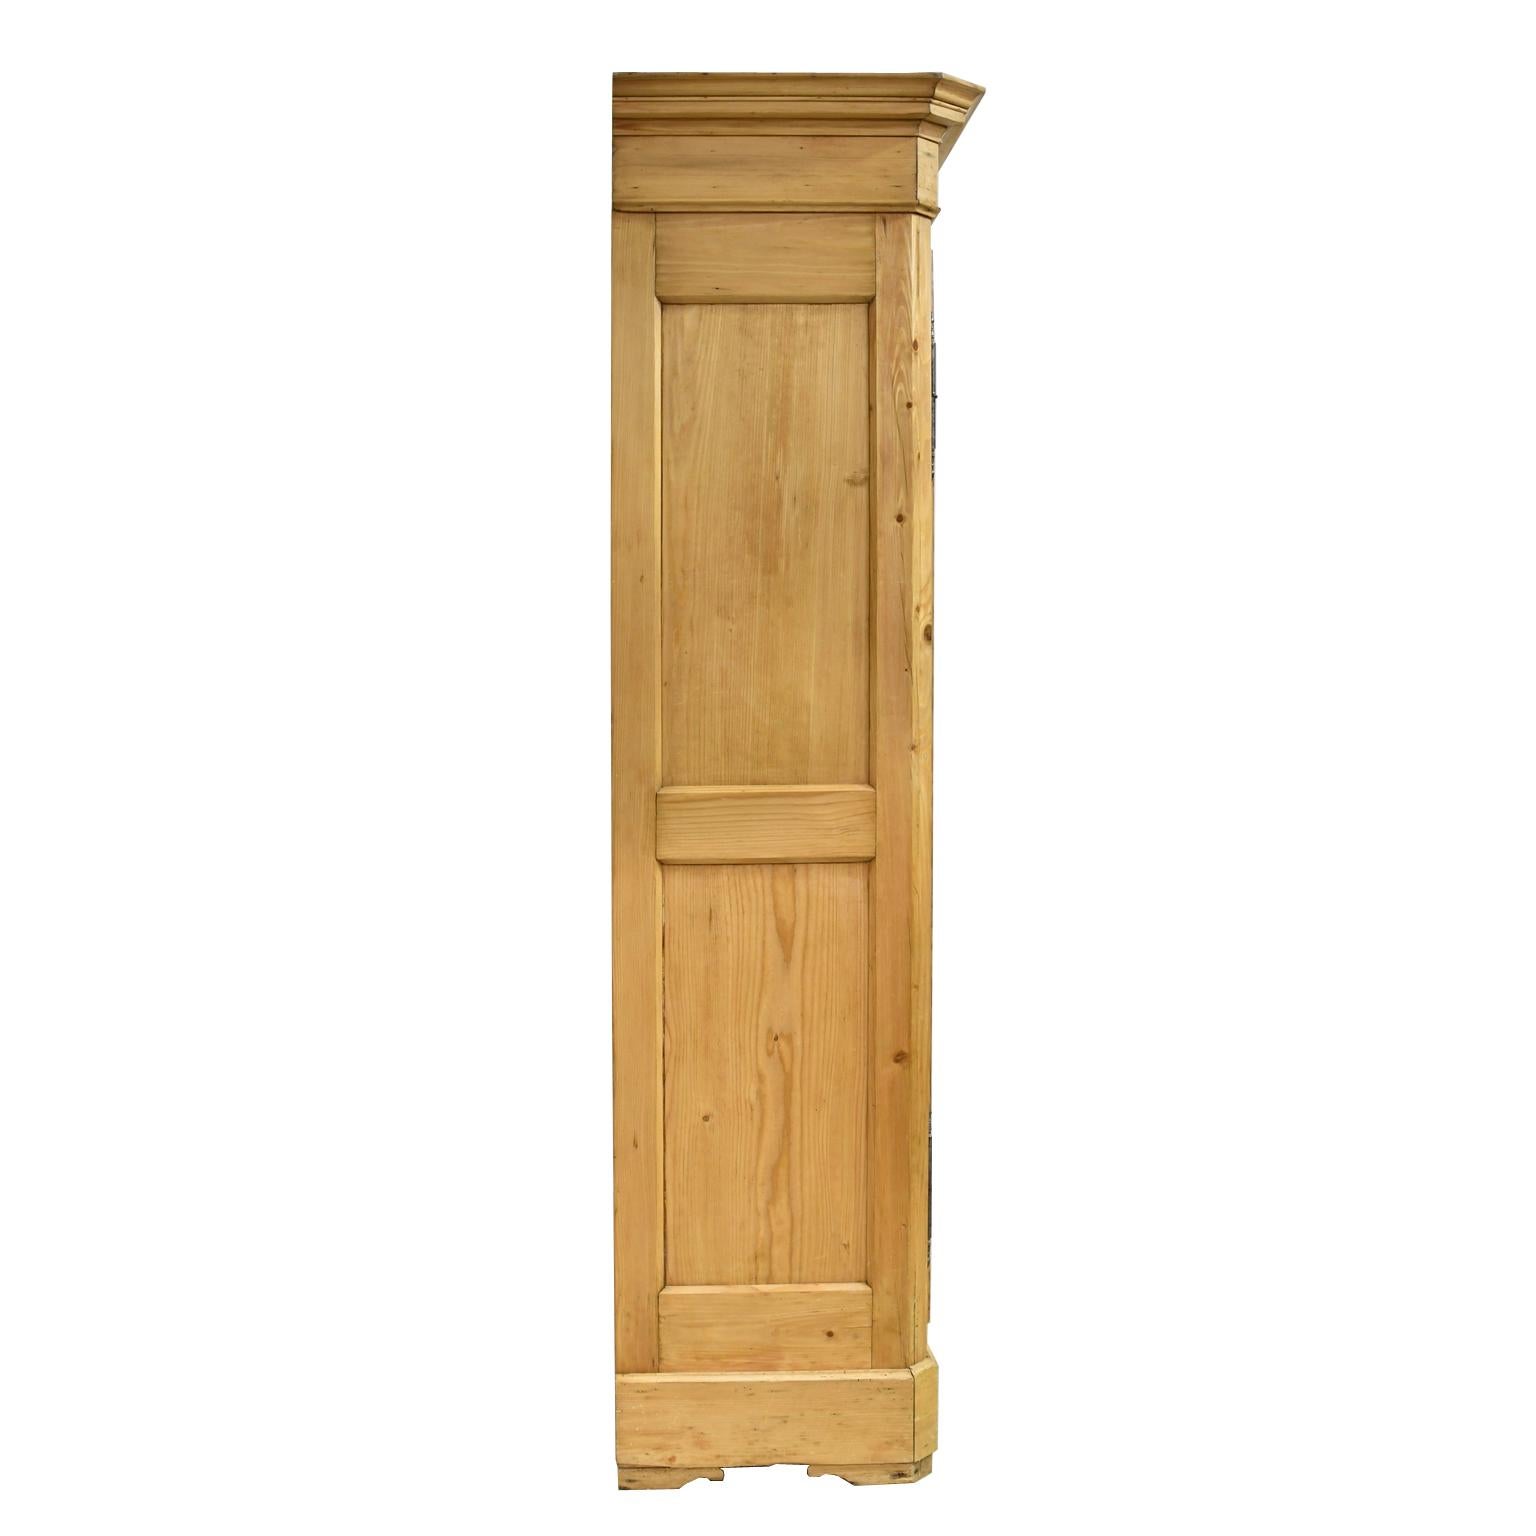 English Wardrobe in Light-Colored Pine with Paneled Doors, c. 1840 4